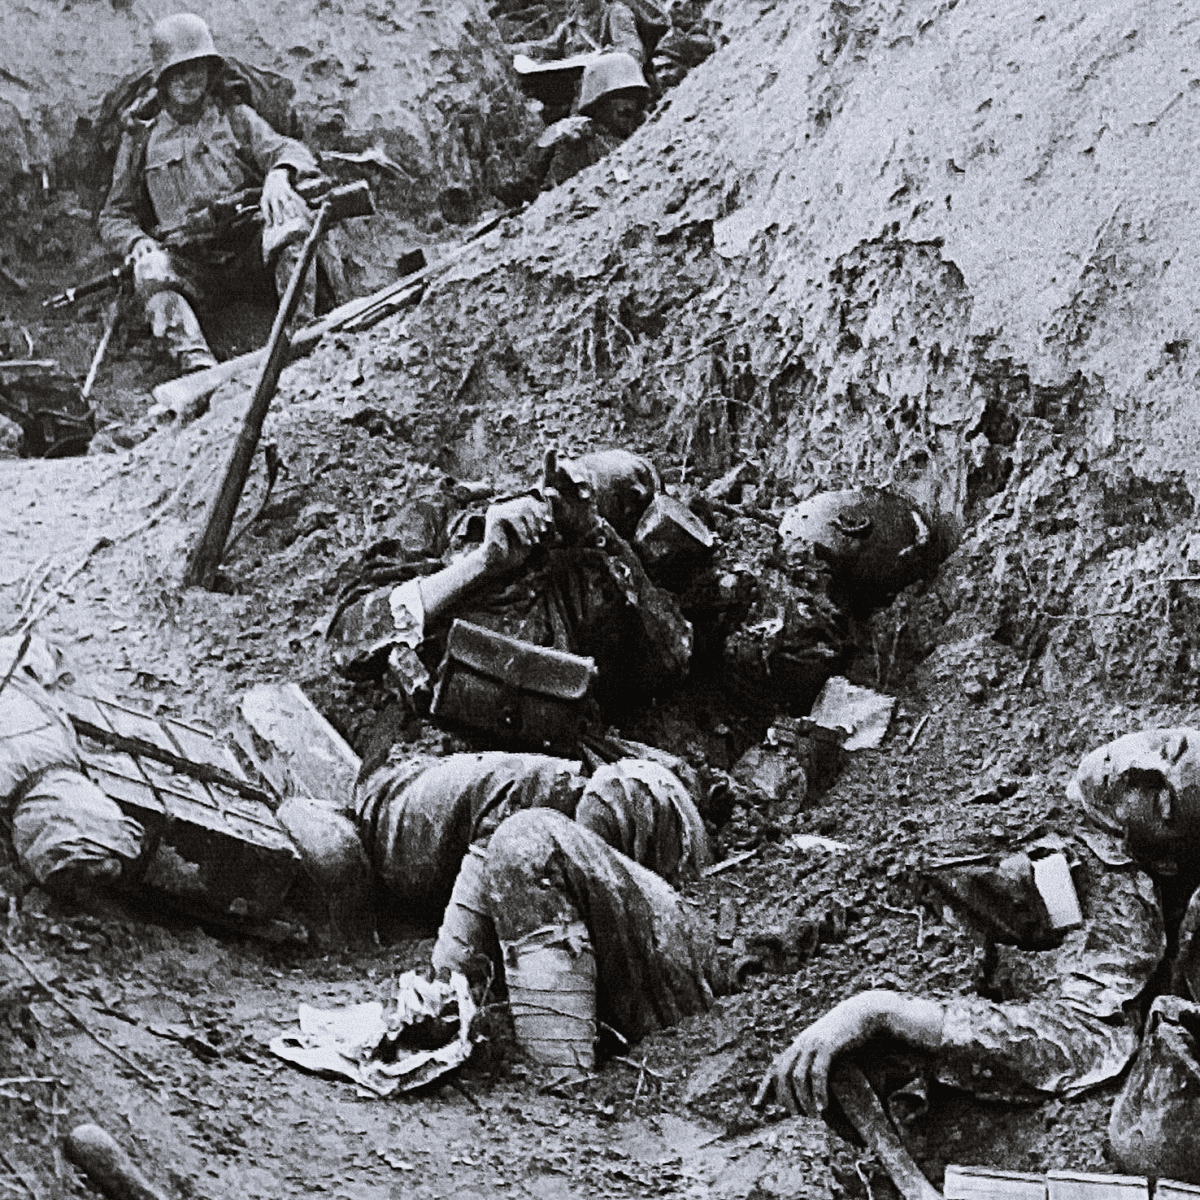 Life in the Trenches of World War I